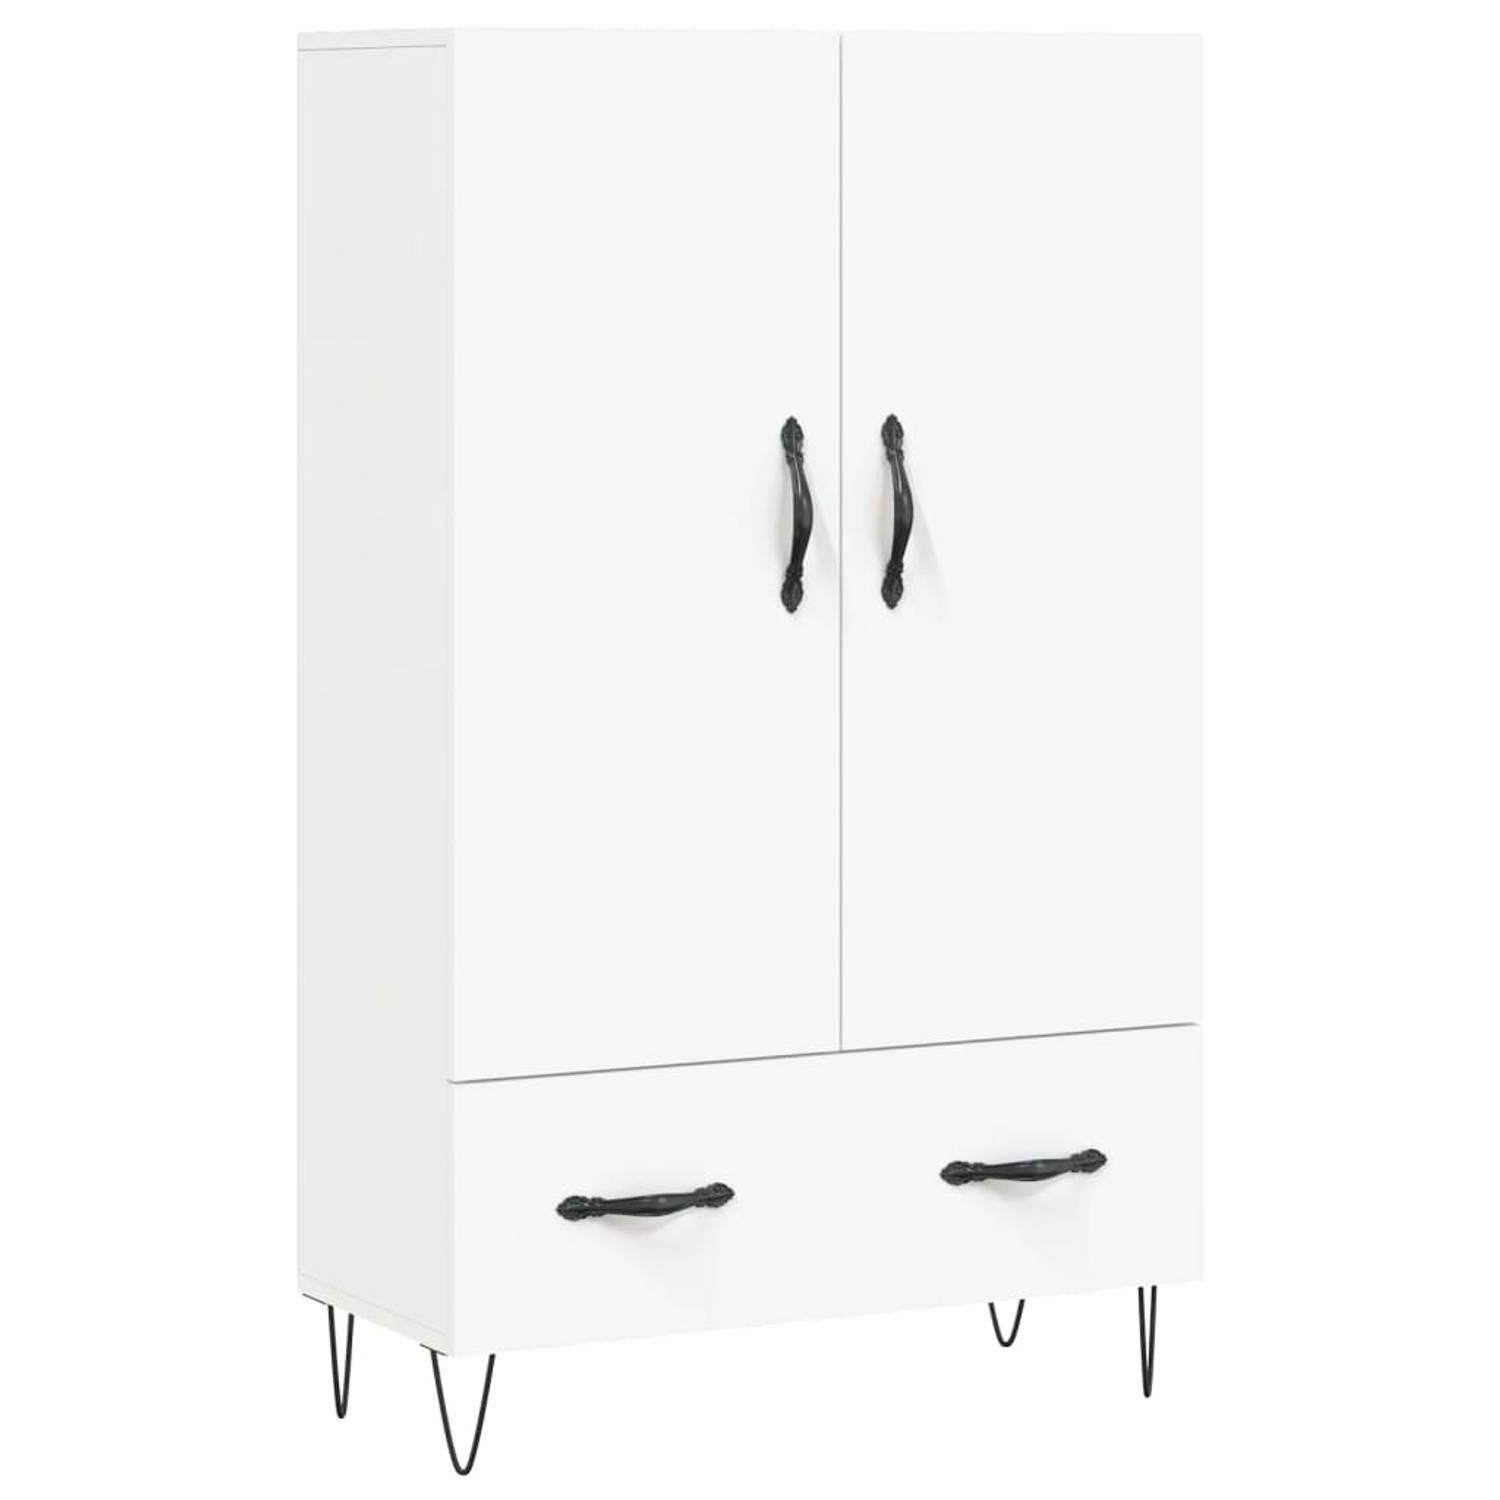 The Living Store - Hoge kast - 69.5 x 31 x 115 cm - wit